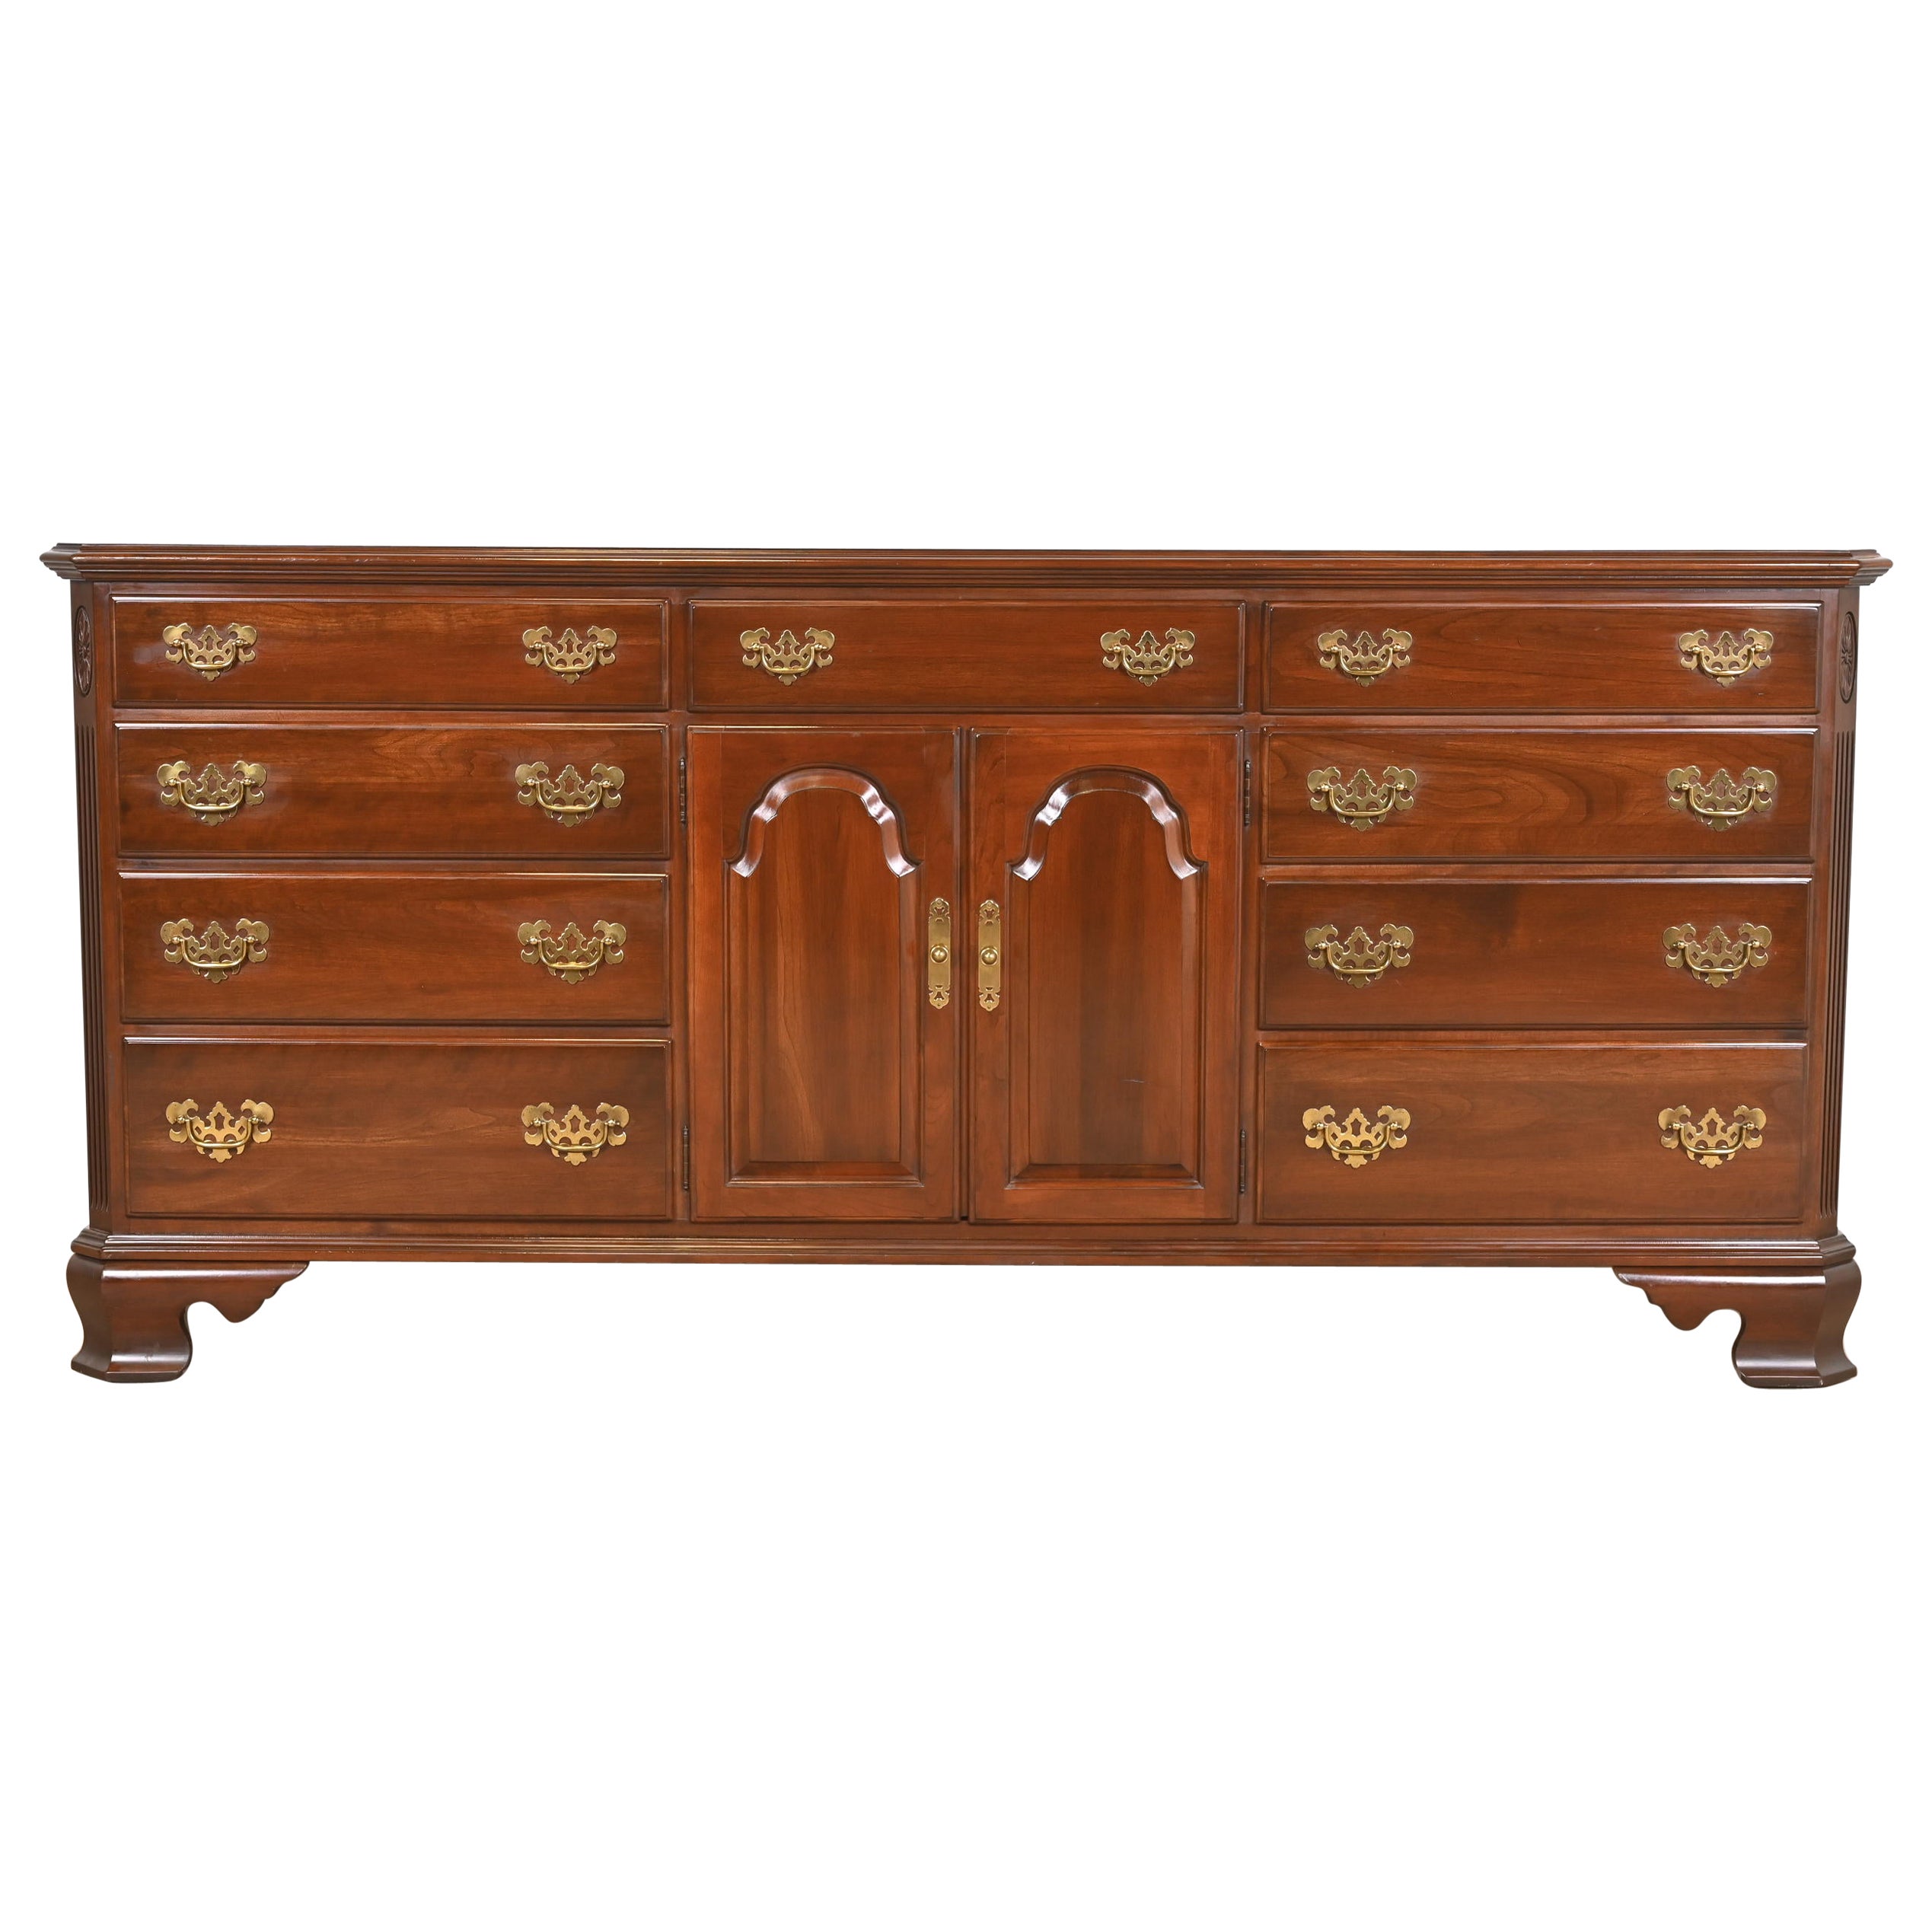 Georgian Solid Cherry Wood Dresser or Credenza For Sale